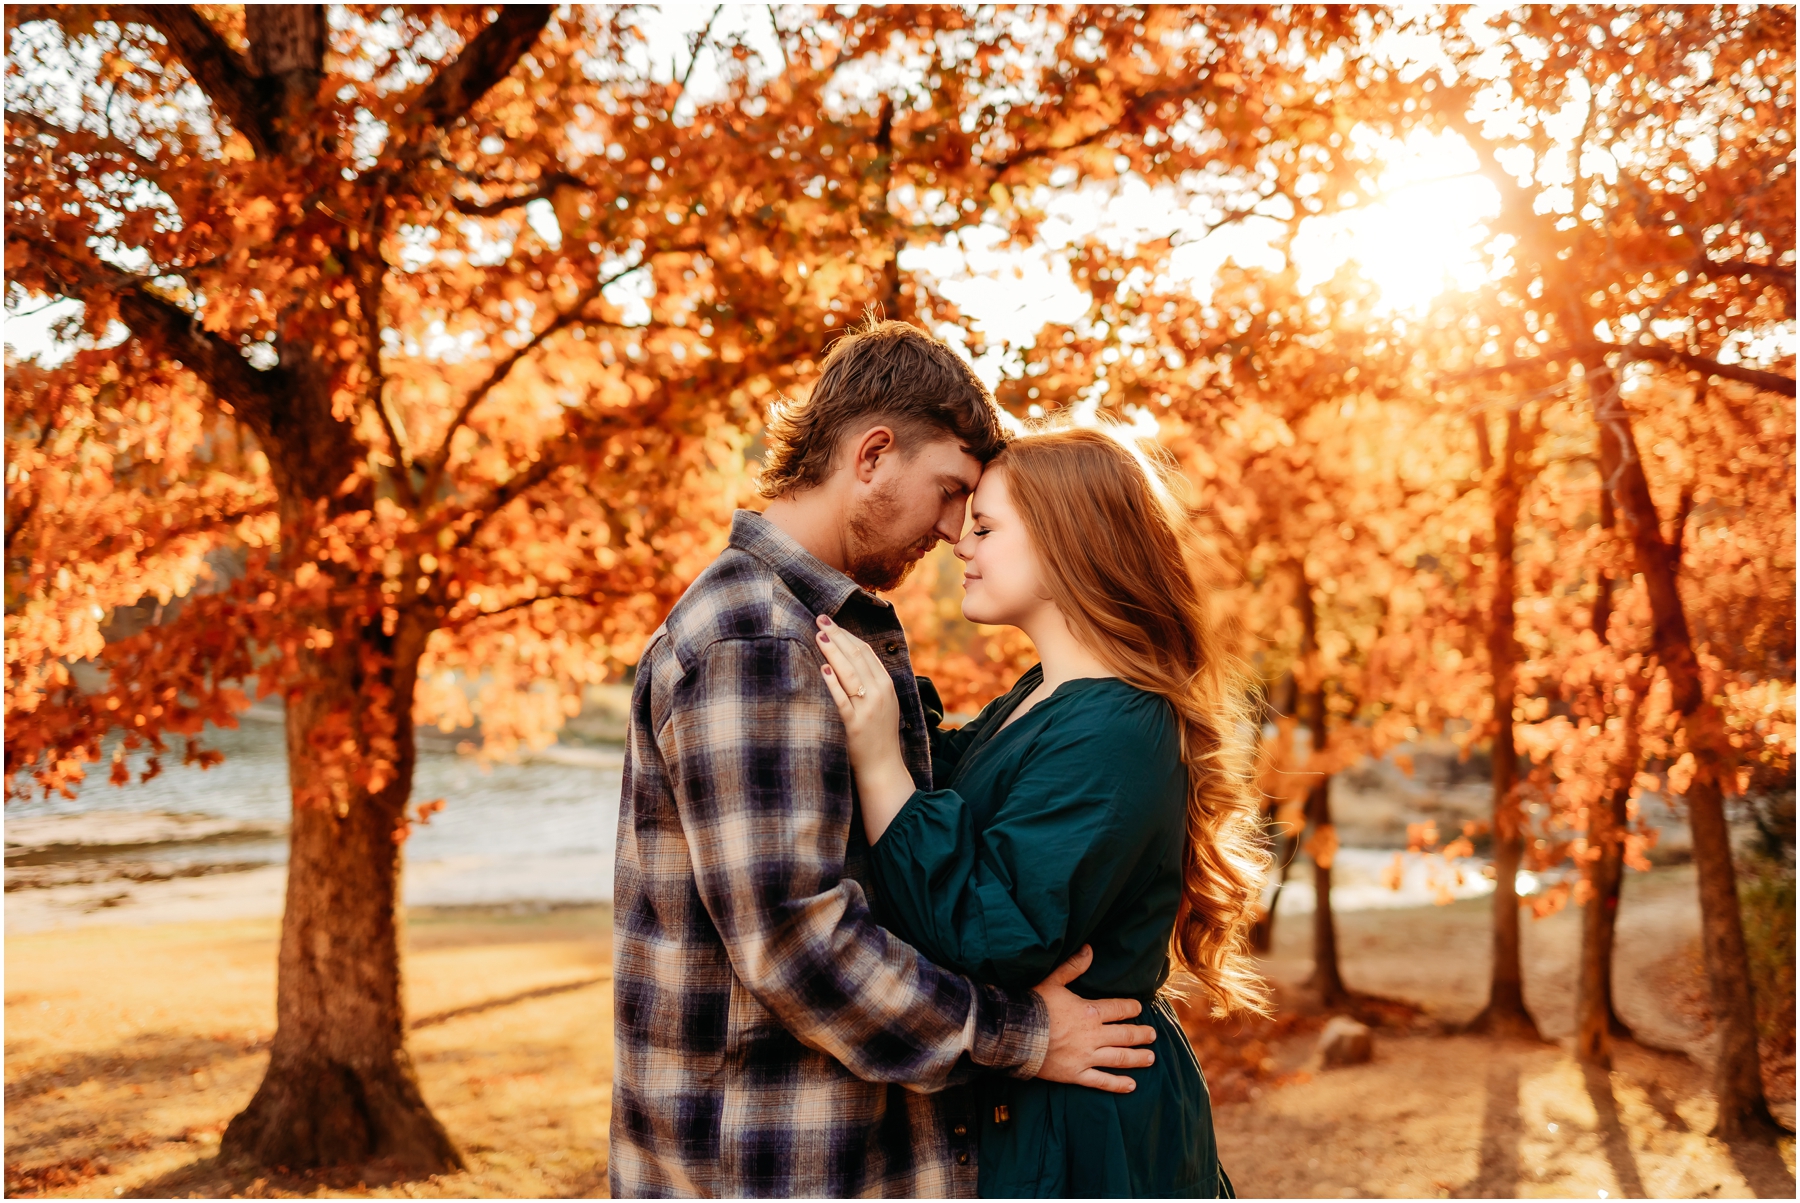 Faith and Stephen during their fall engagement session at Knob Noster State Park with Brittany Jewell Photography, surrounded by vibrant autumn foliage and scenic landscapes.